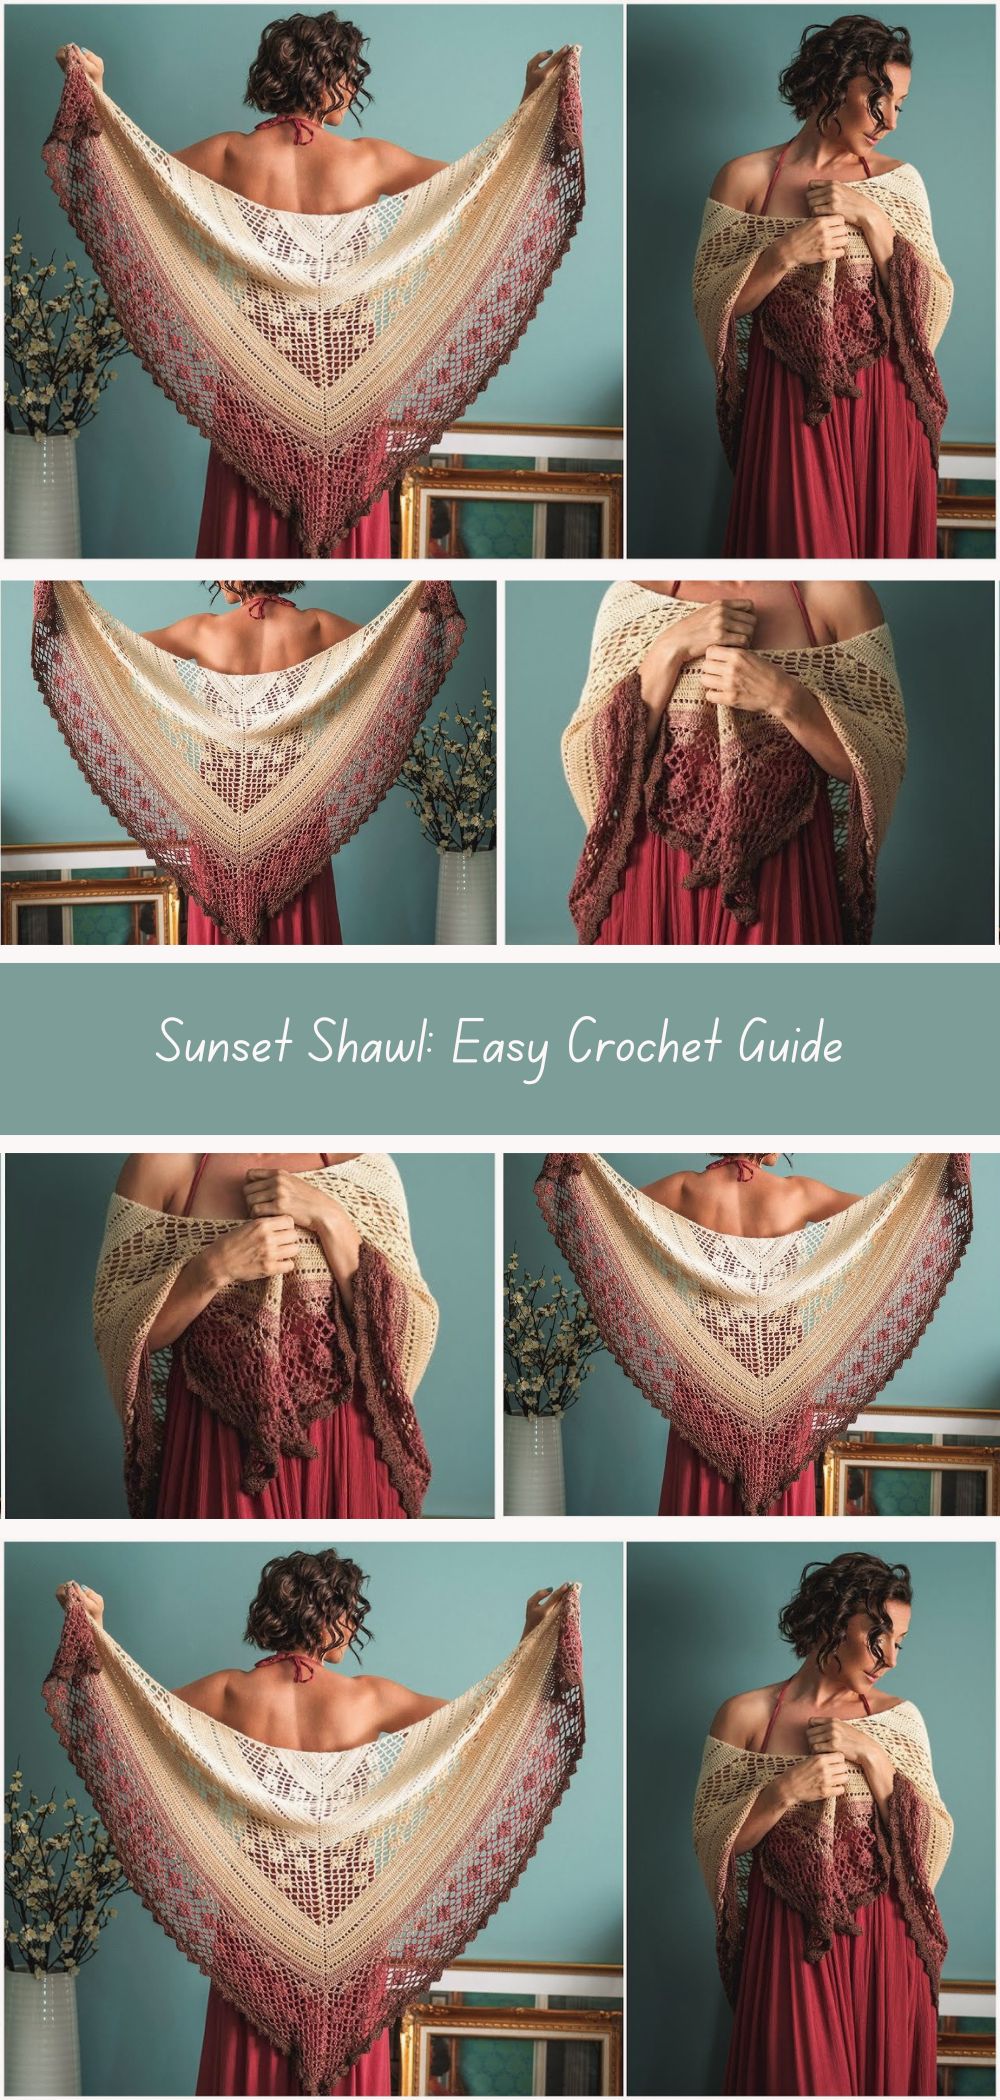 Simple Sunset Shawl Crochet Tutorial - Learn to crochet a beautiful shawl inspired by the colors of the sunset